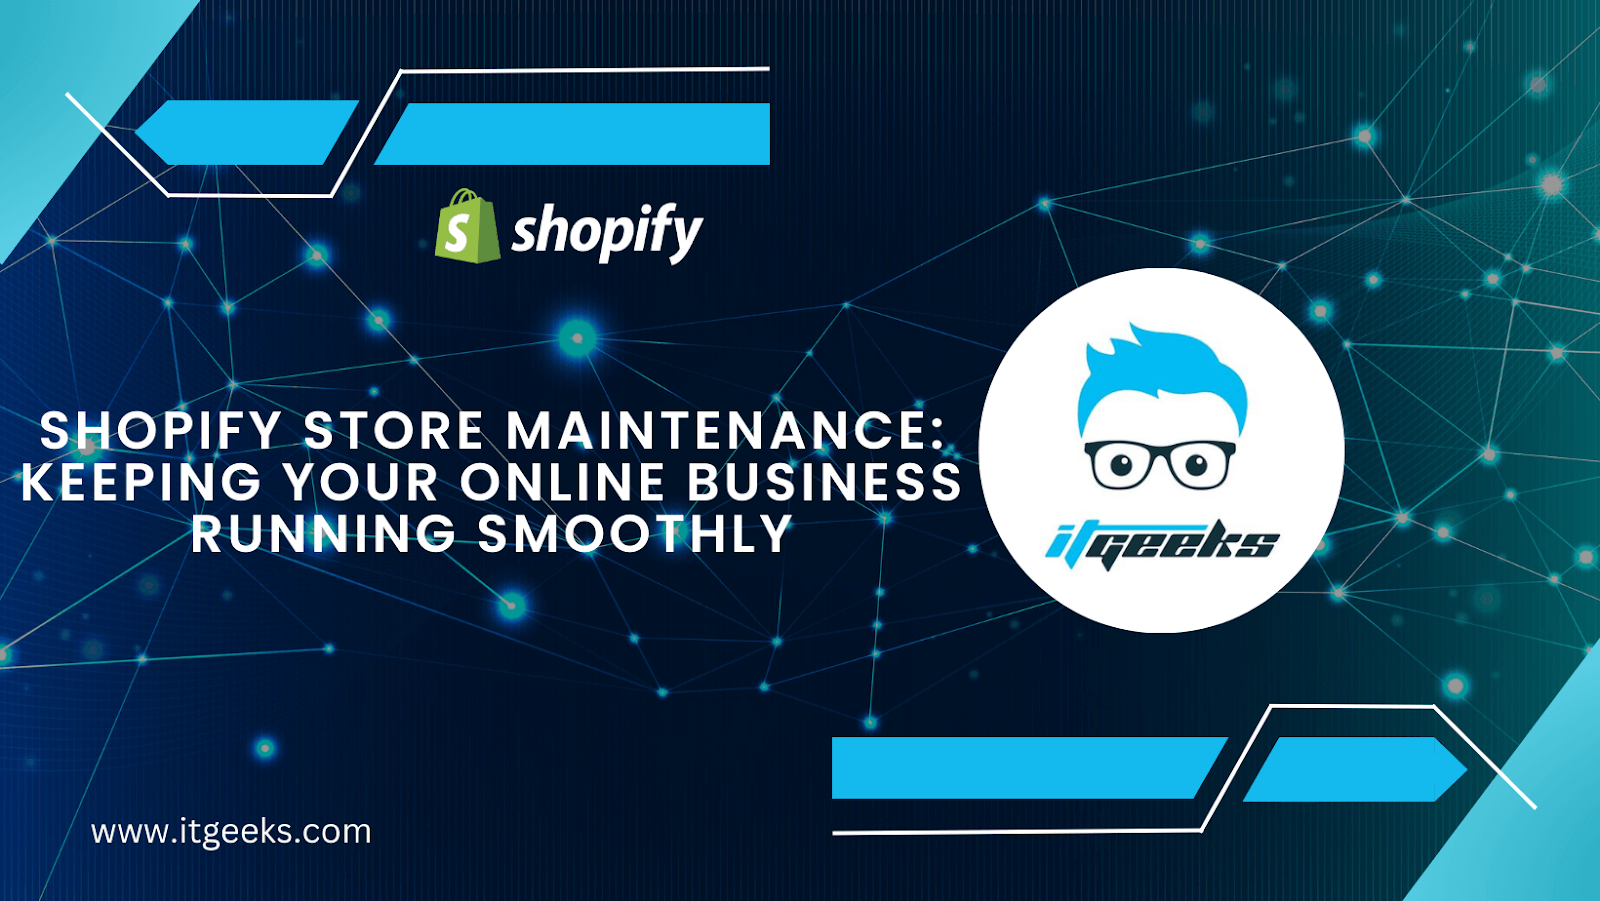 Shopify Store Maintenance: Keeping Your Online Business Running Smoothly